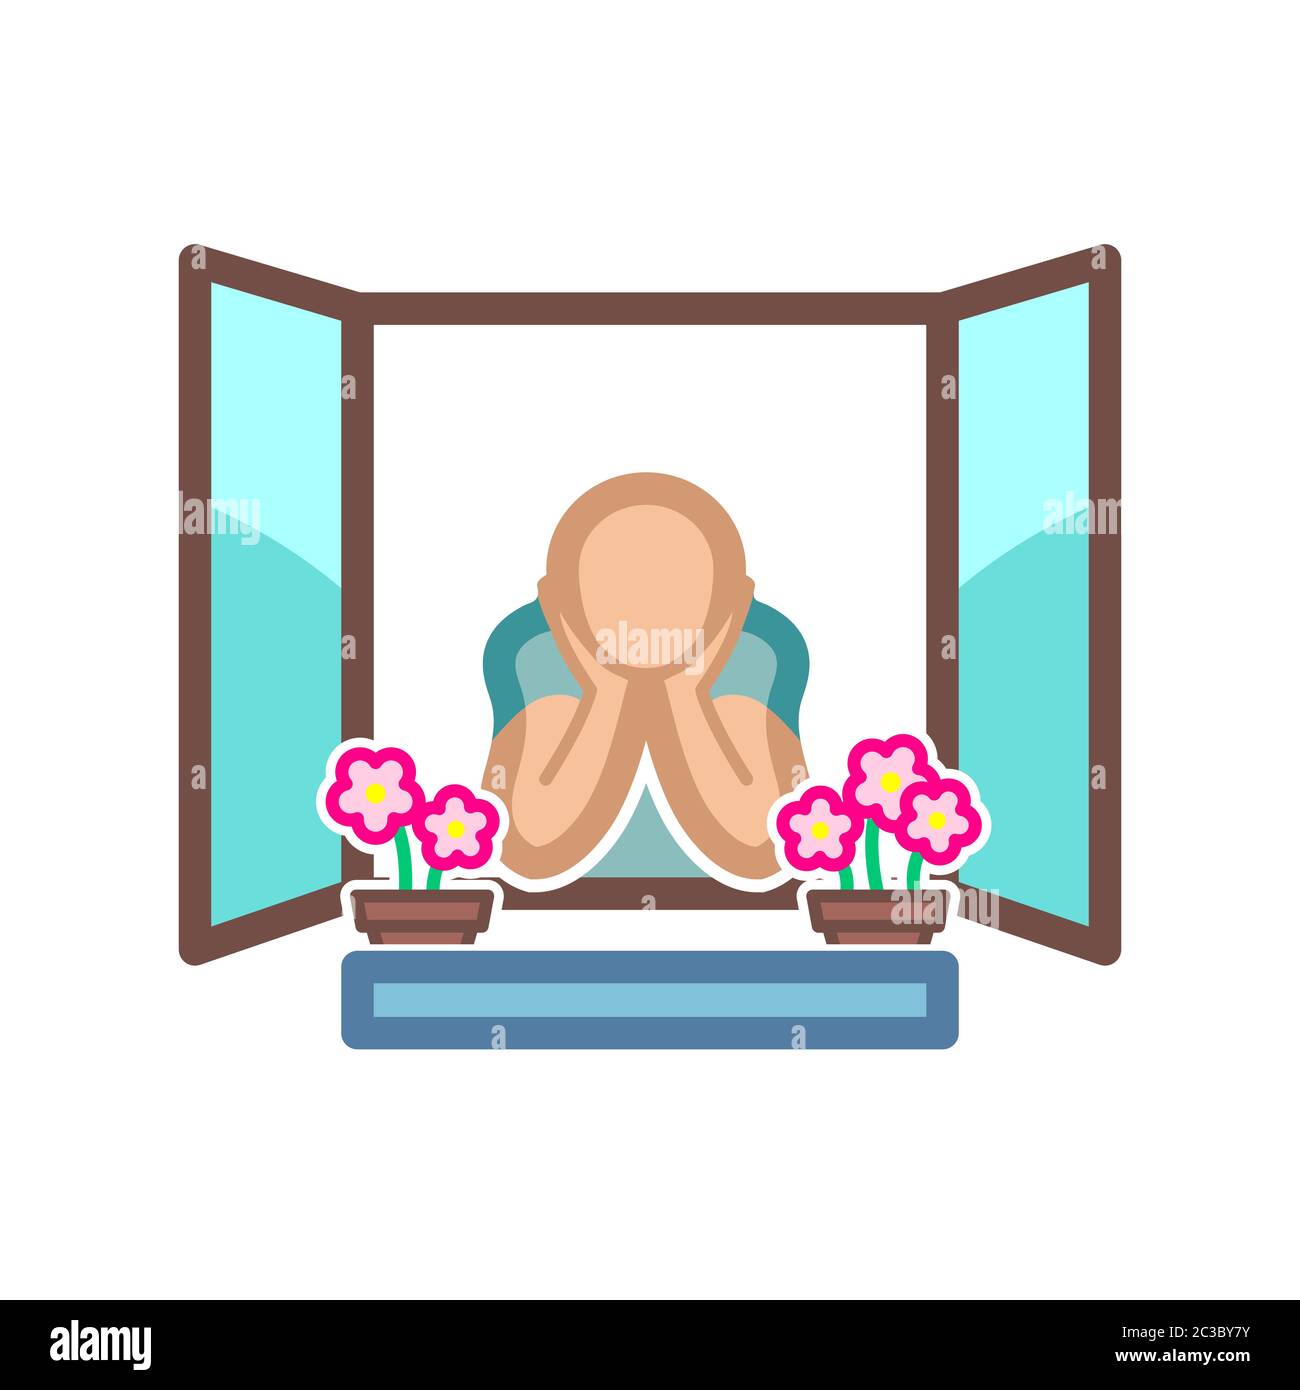 Stay at home icon in color of a person looking out the window. Isolated on white. Vector illustration. Stock Vector